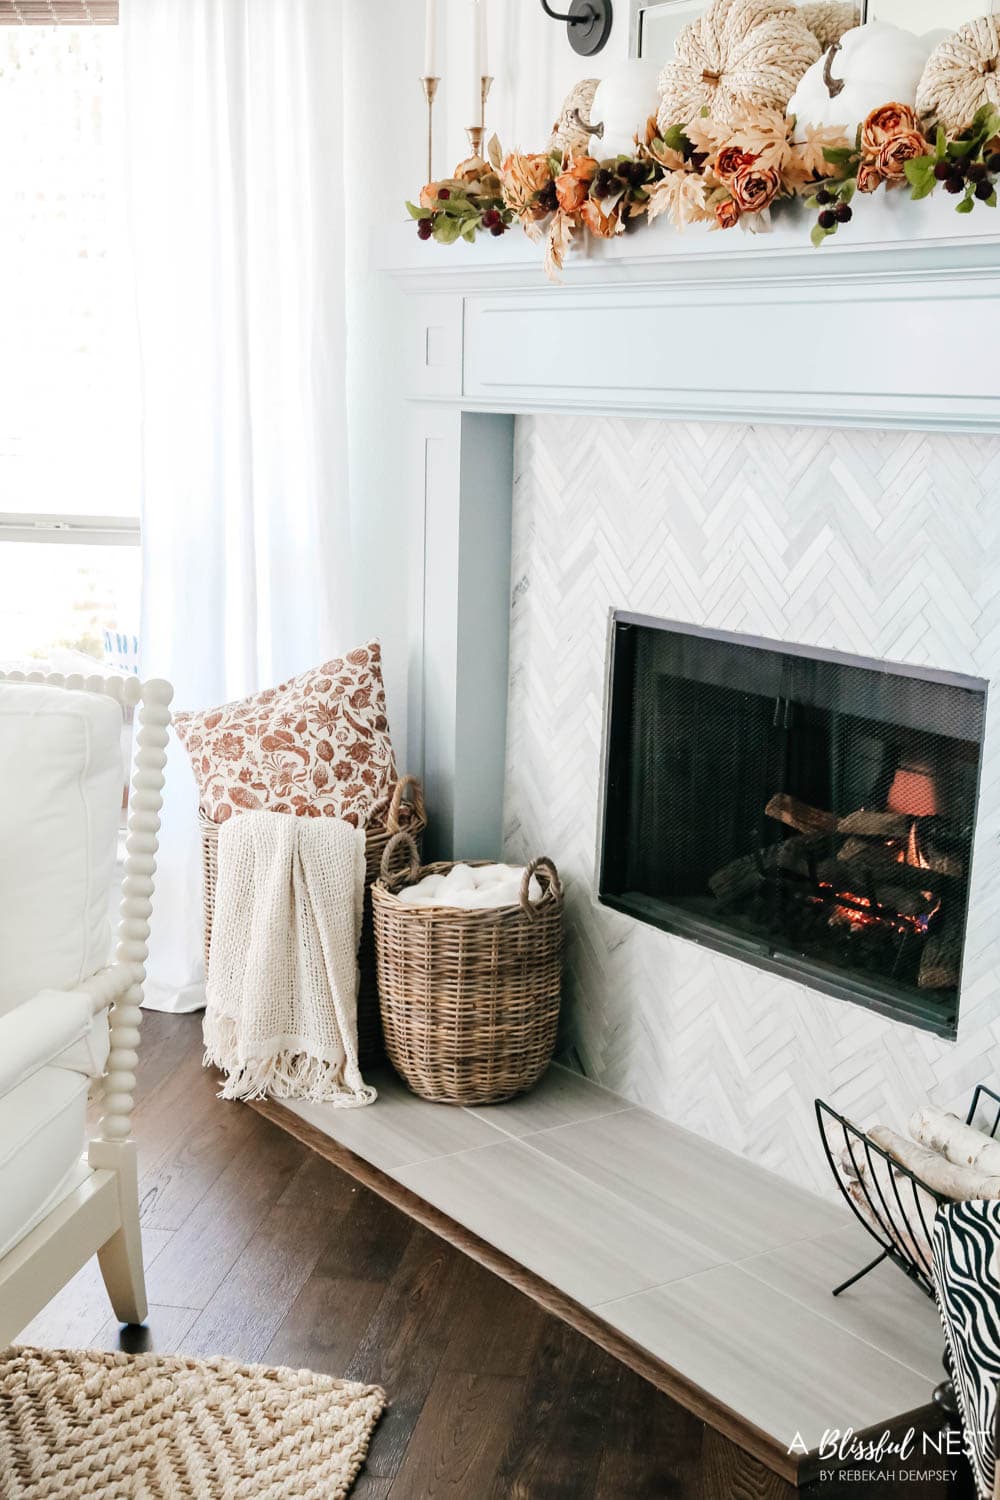 Add plush blankets to baskets next to the fireplace for accessibility in the colder weather. #ABlissfulNest #falldecor #falldecorating 